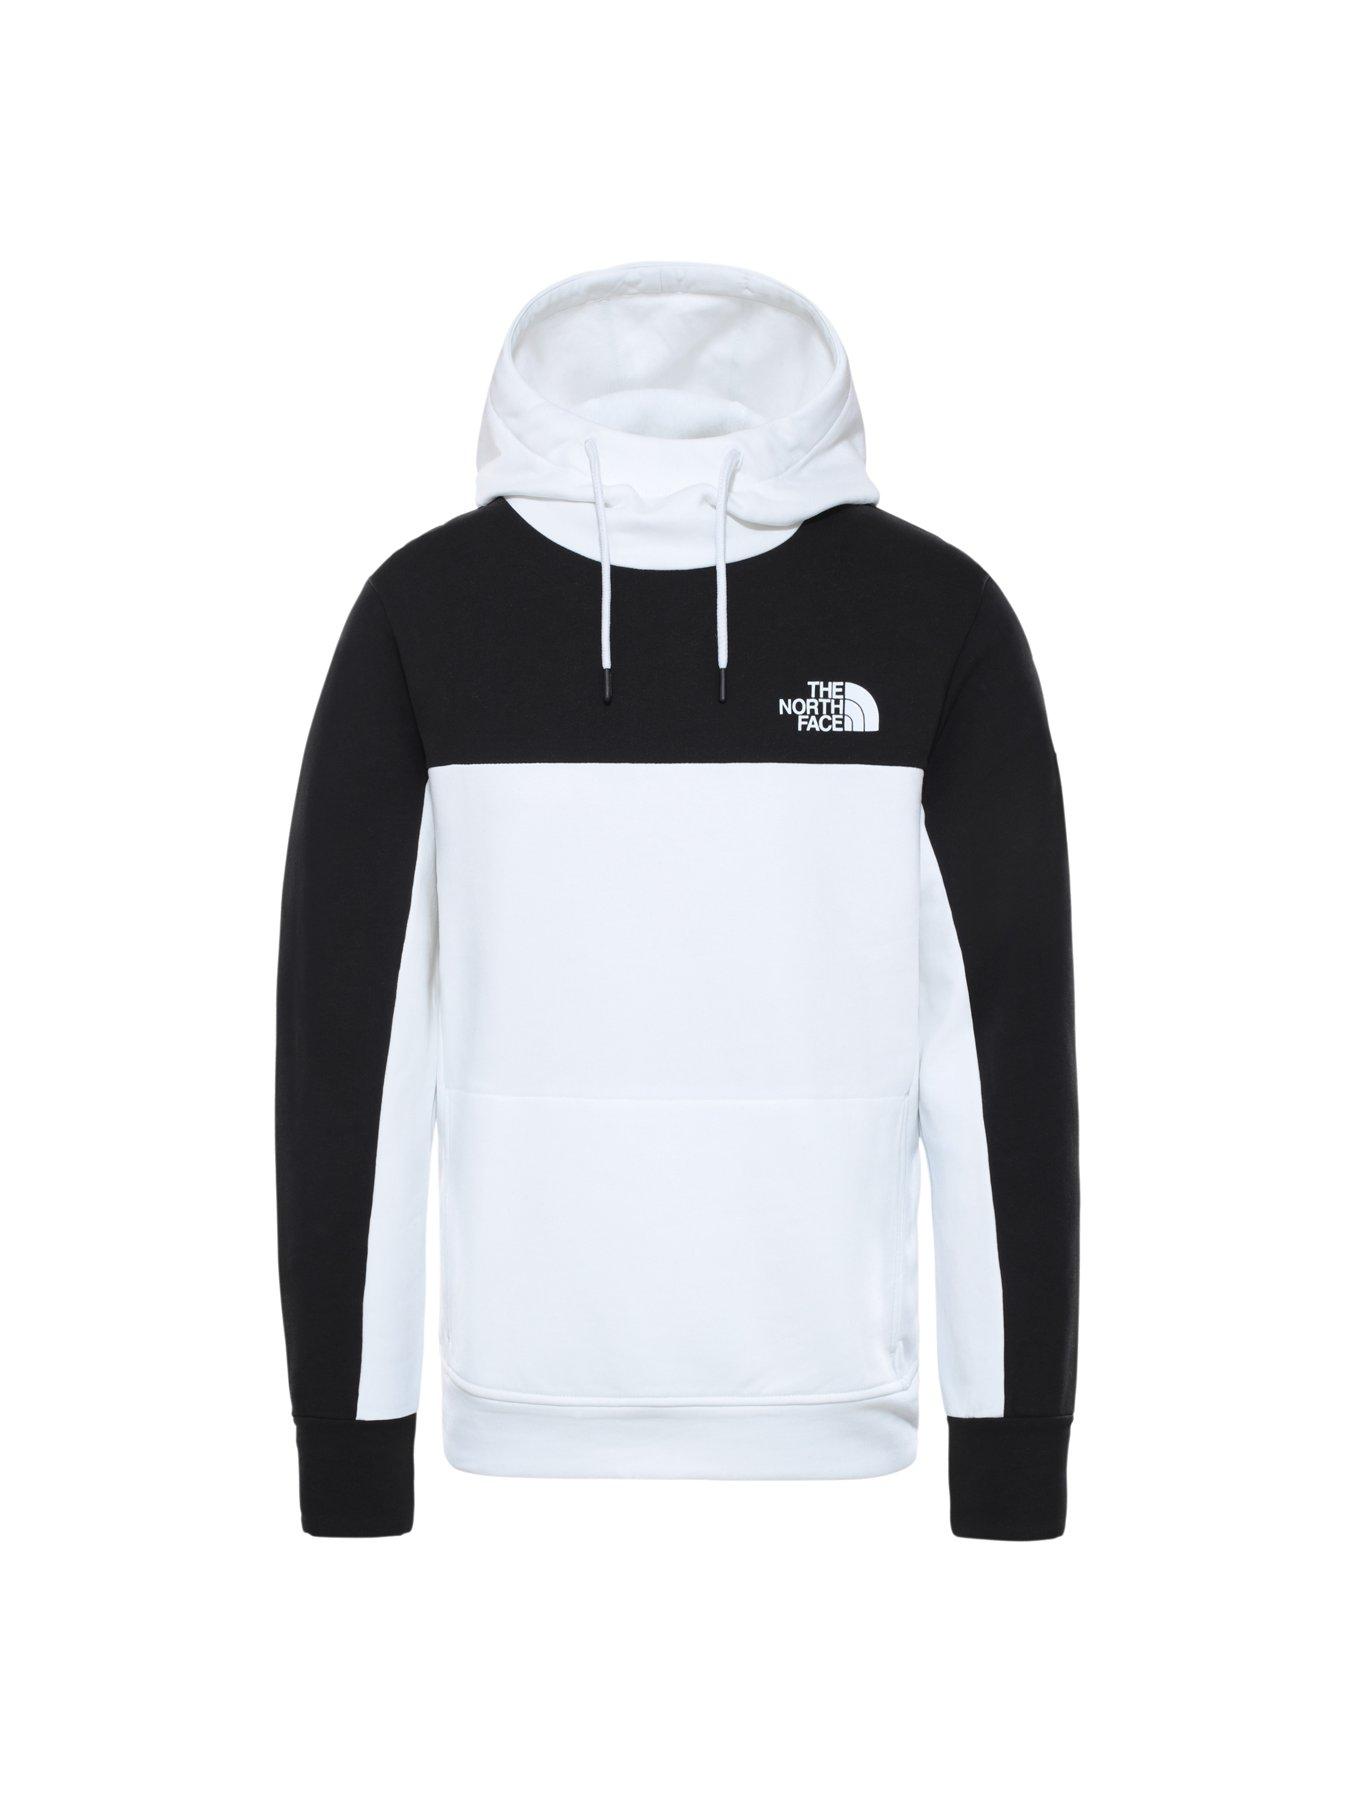 THE NORTH FACE Himalayan Hoodie - White 